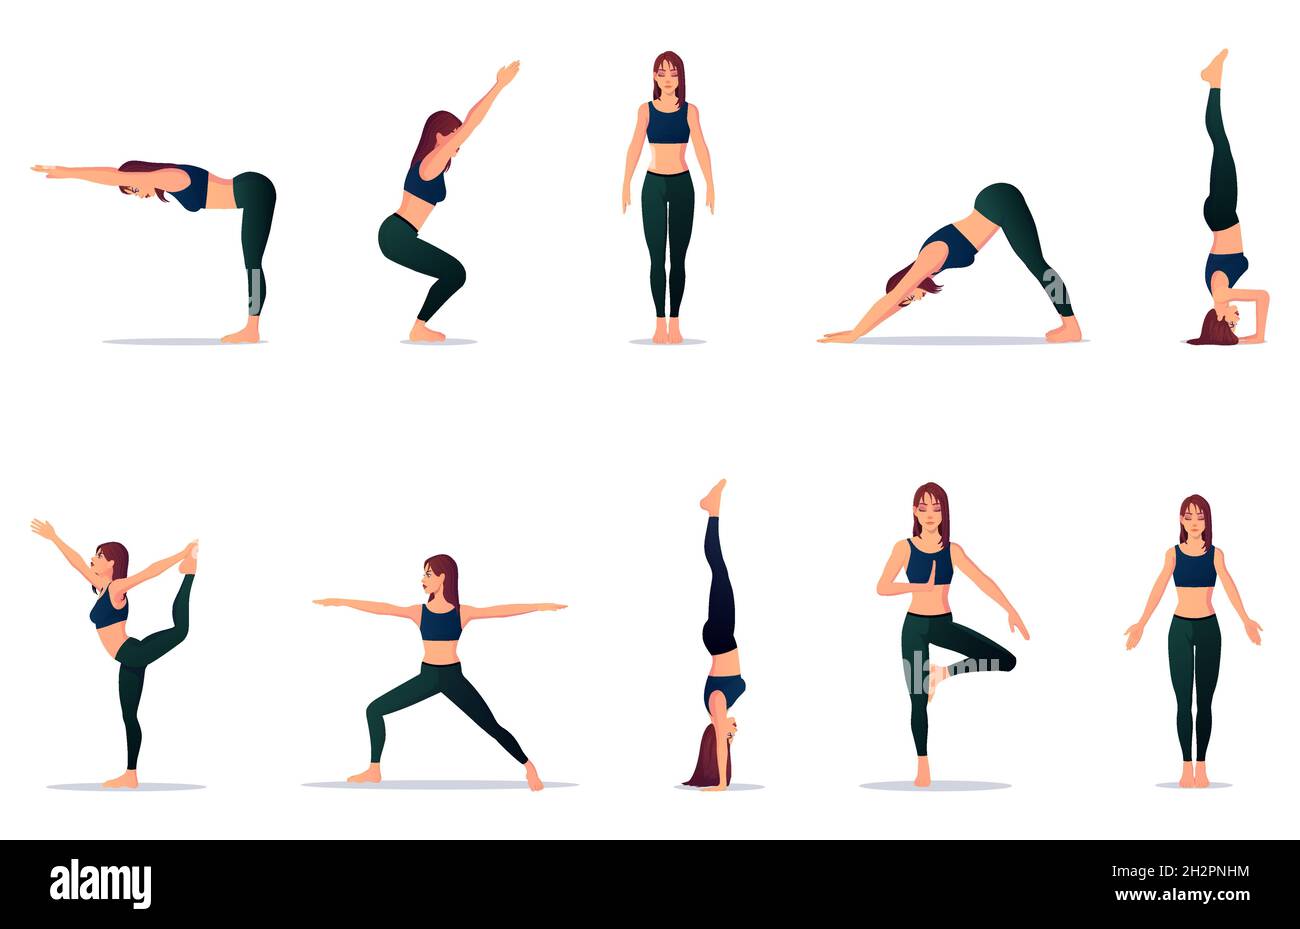 Set of Yoga Poses, Fitness Pose Collection Premium Illustrations Stock Vector